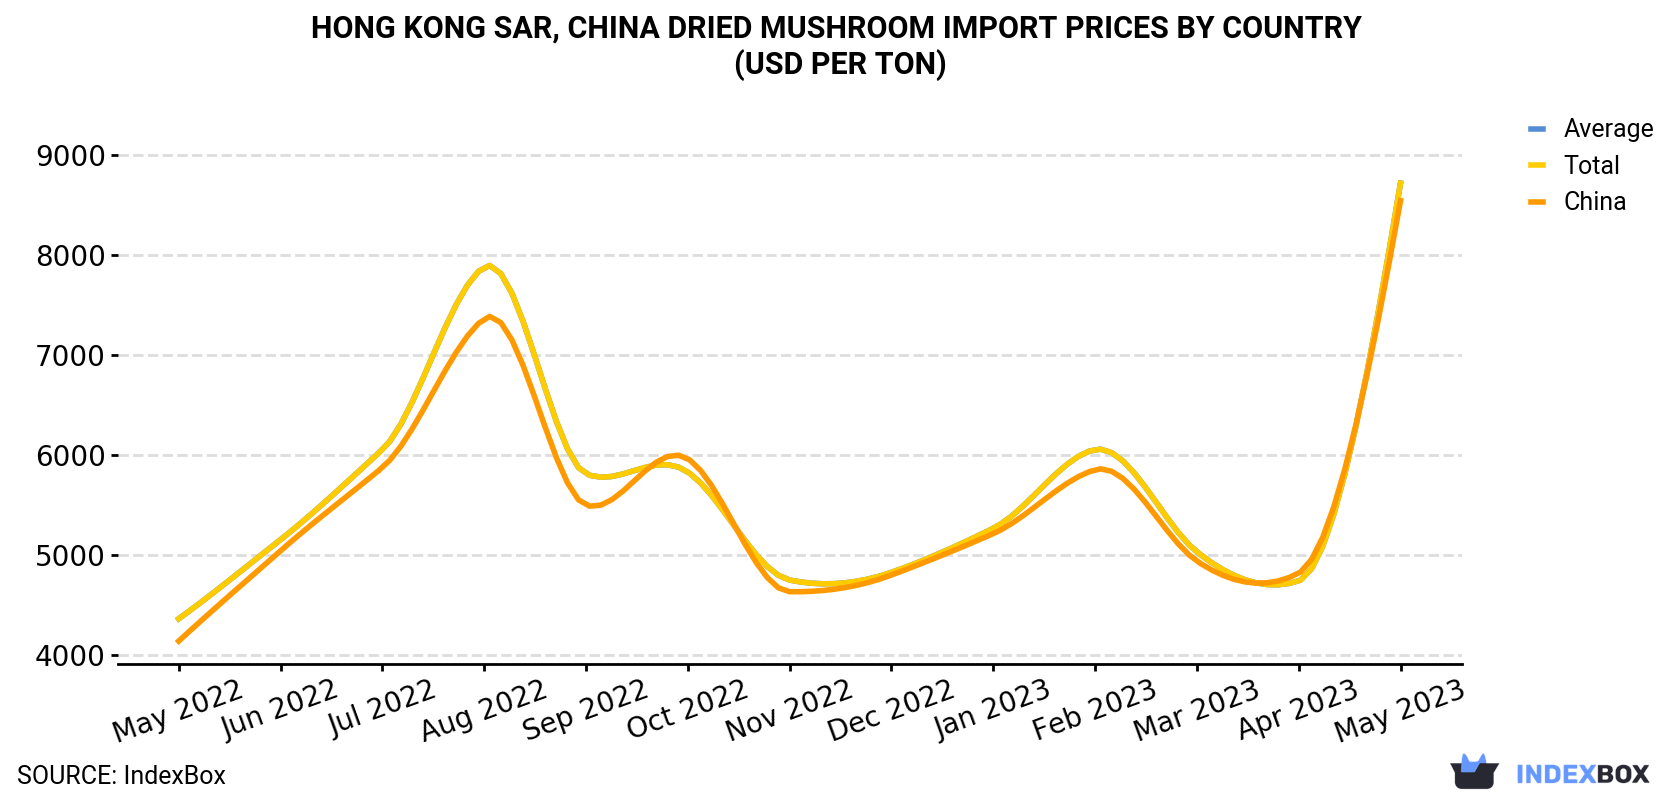 Hong Kong Dried Mushroom Import Prices By Country (USD Per Ton)